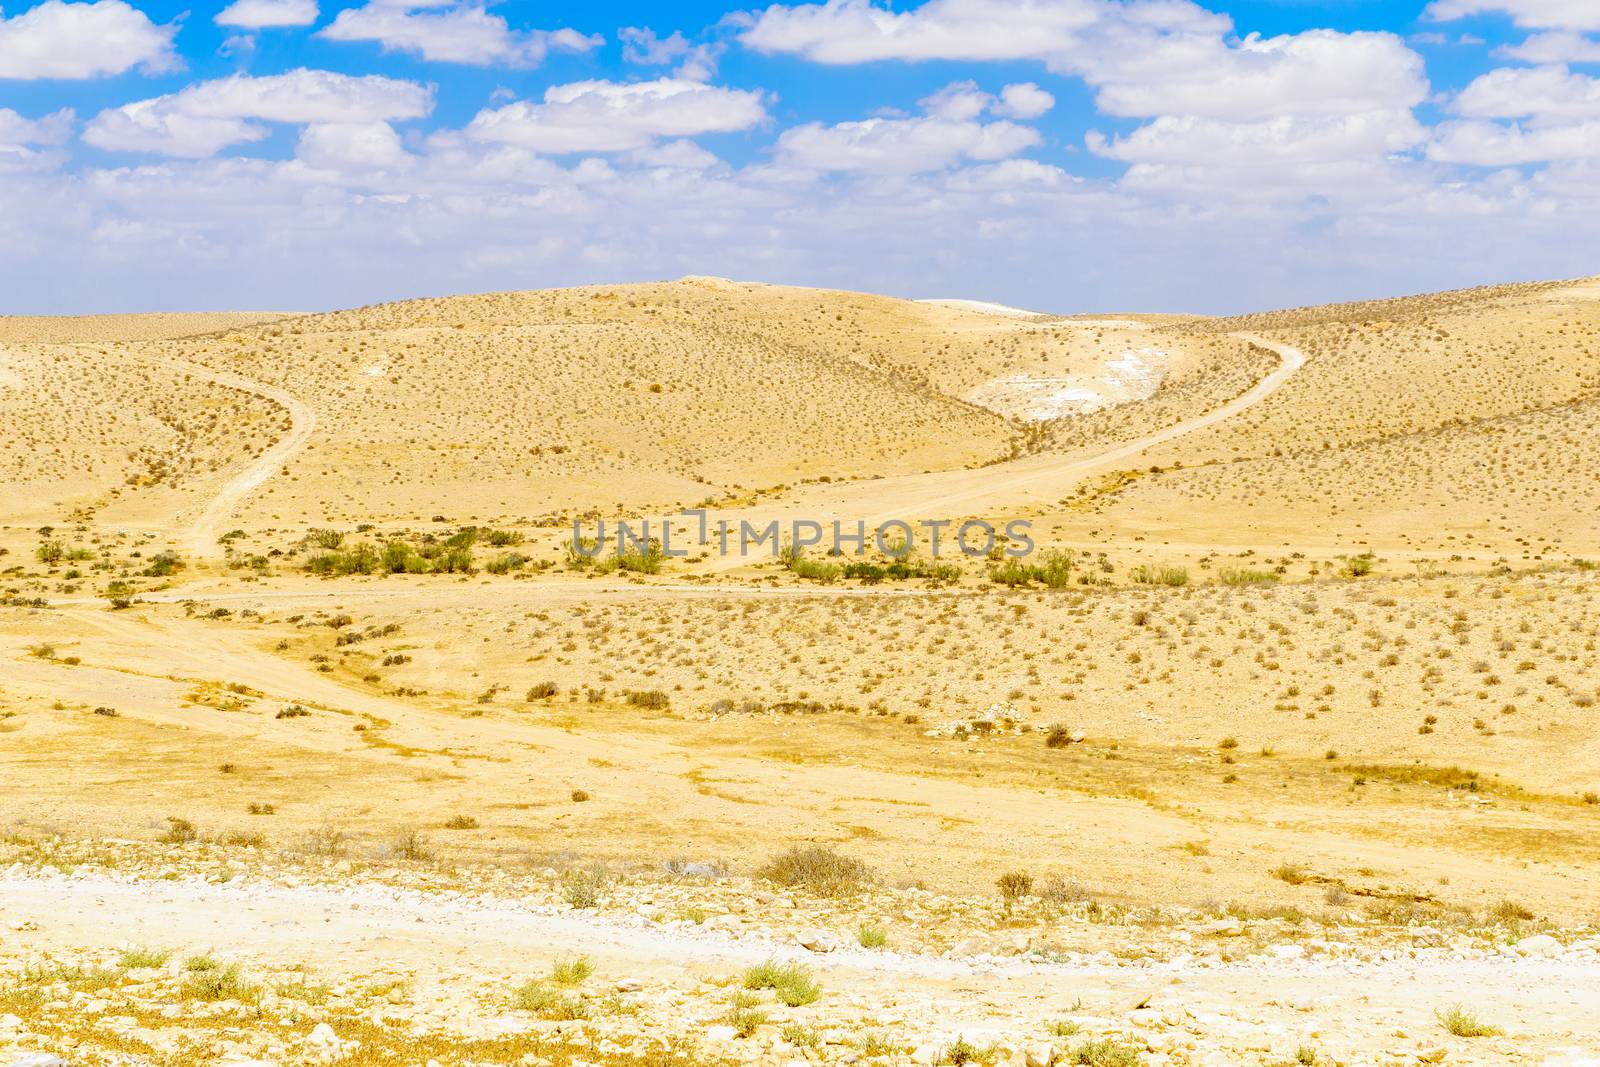 View of the Negev Desert, from Tali Lookout Point. Southern Israel